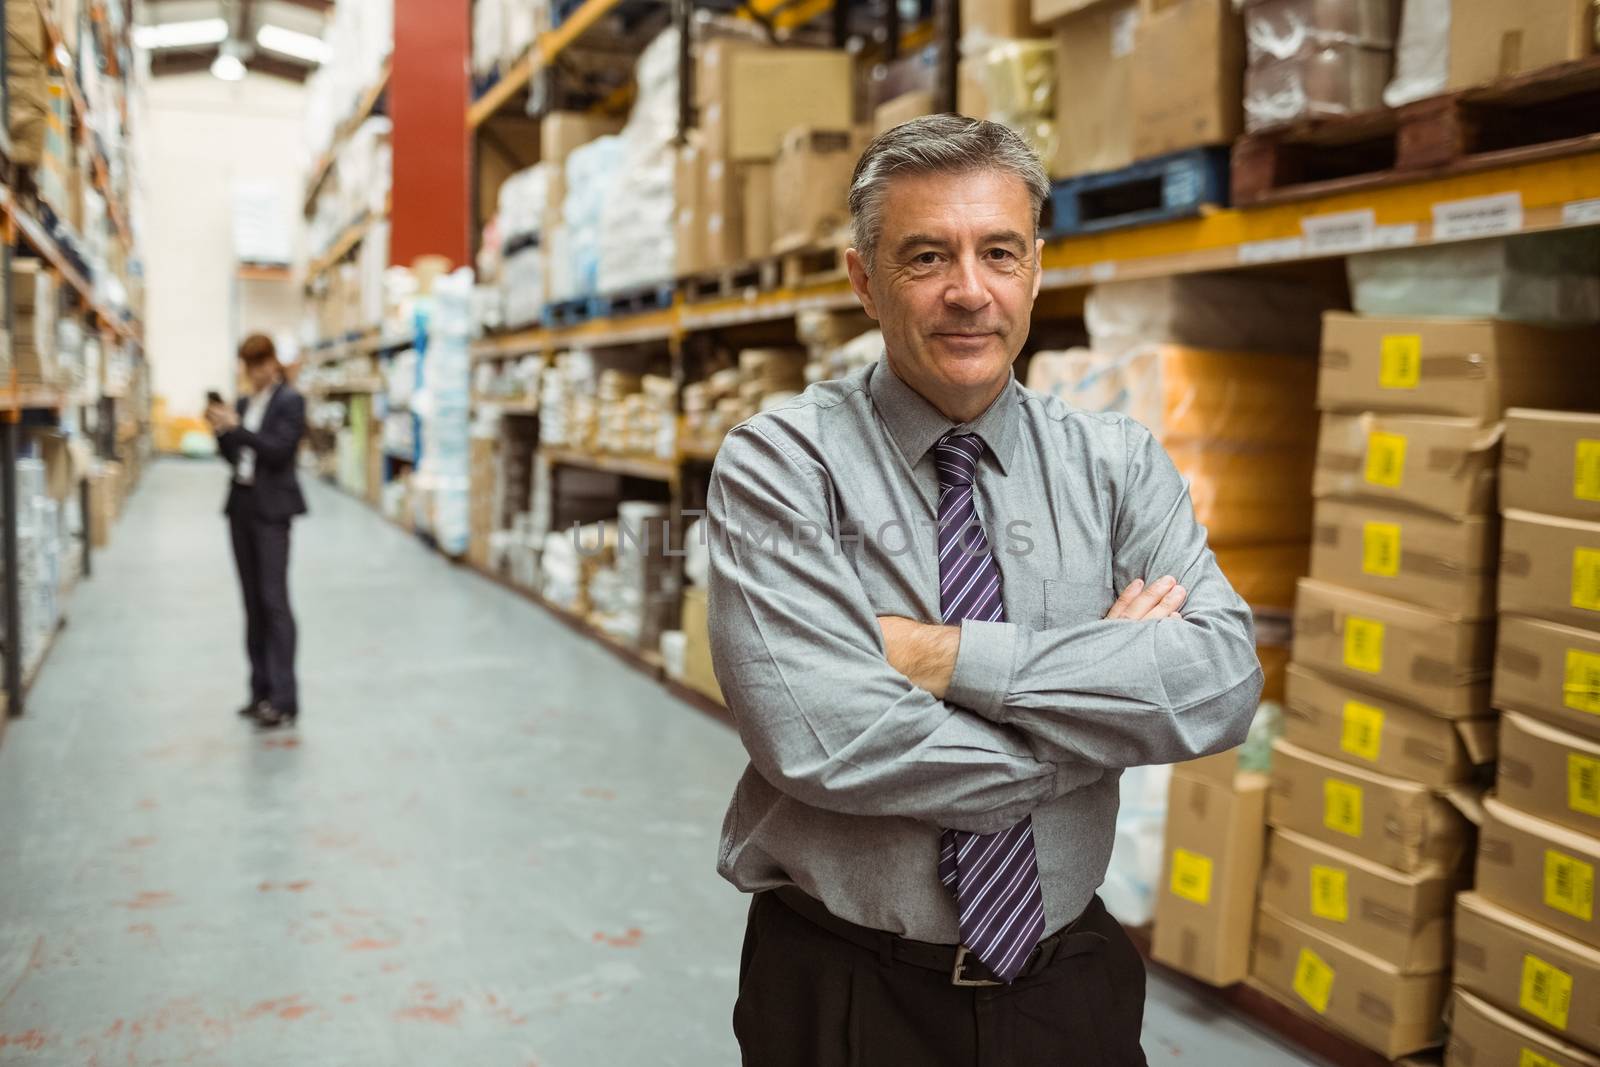 Smiling male manager with arms crossed in a large warehouse